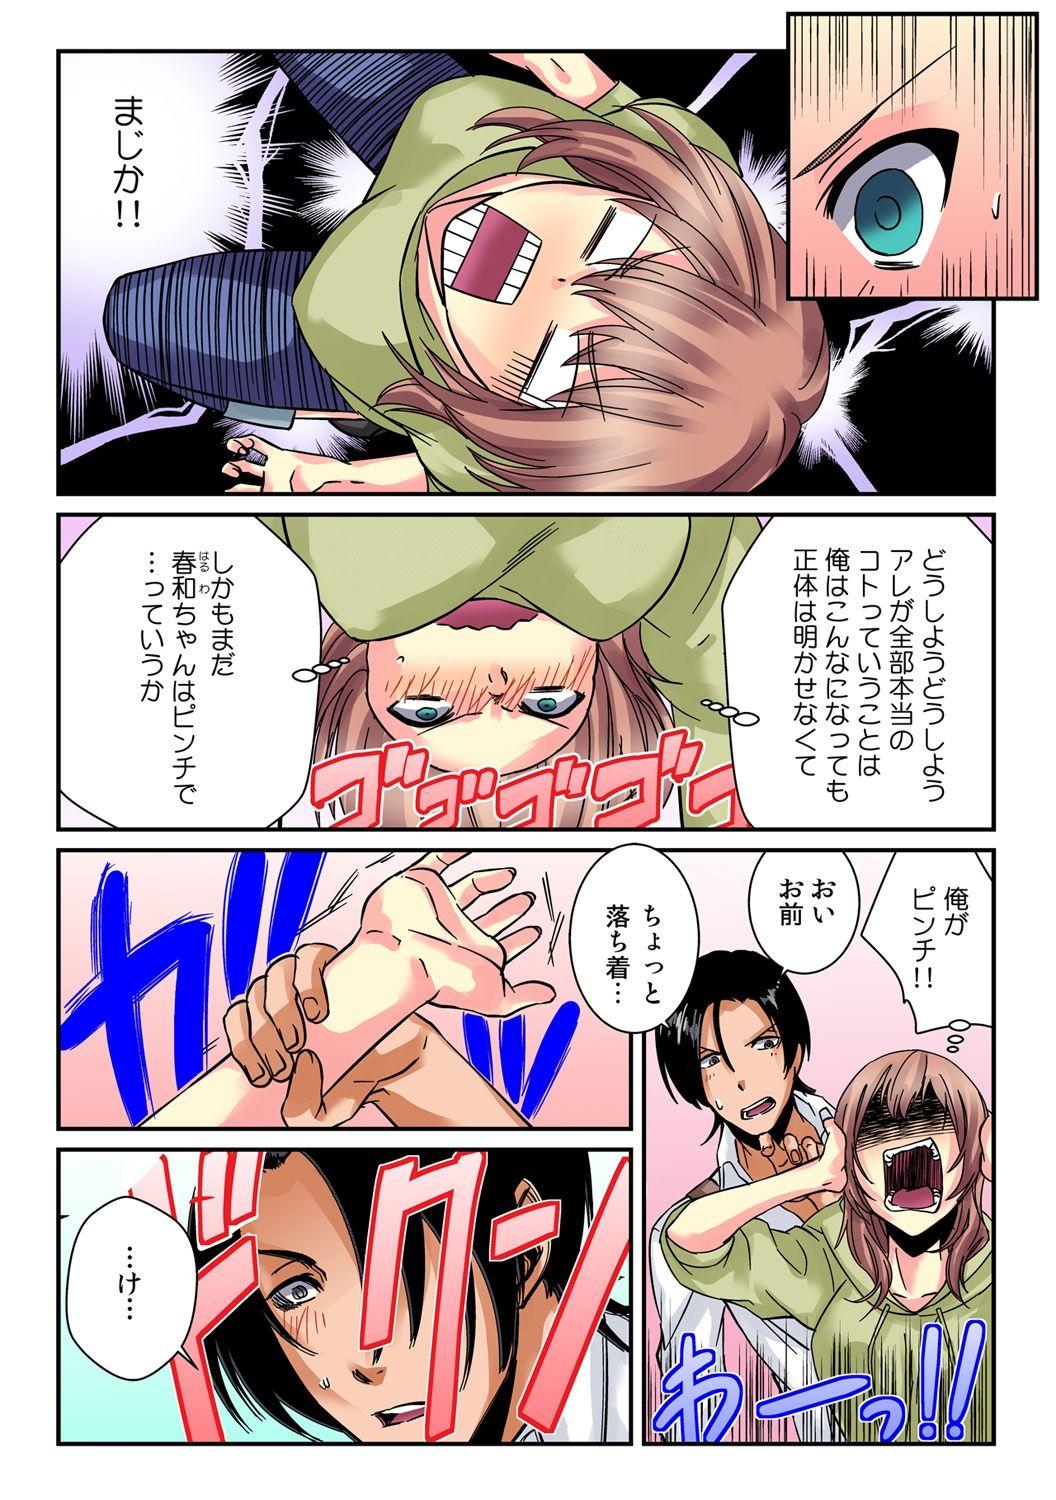 [Akagi Gijou / Akahige] I became a girl- and I definitely can't let anyone find out! (Full color) 1 14